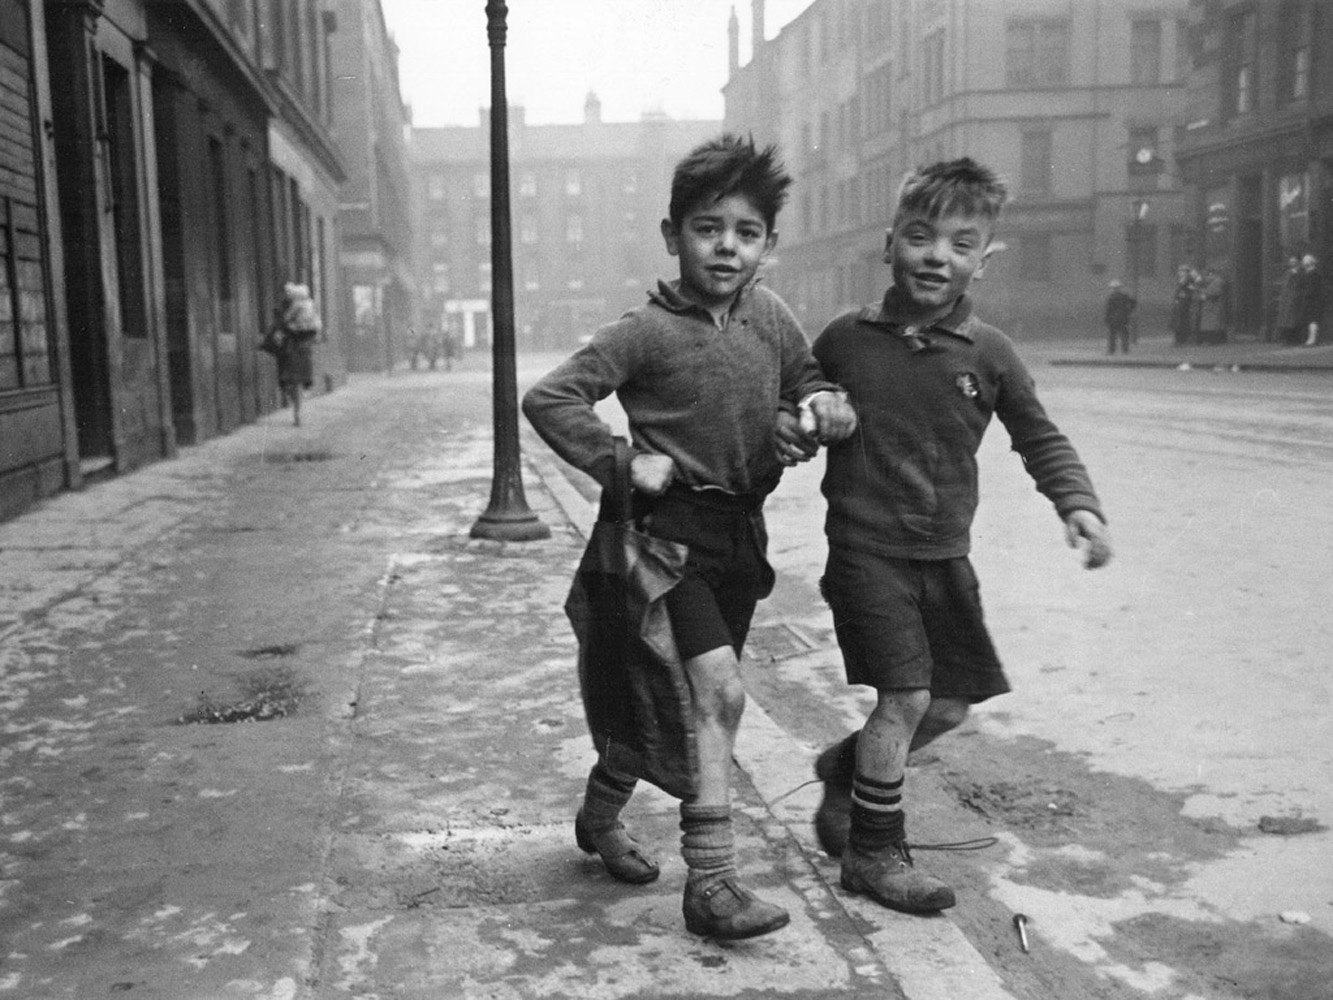 Gorbals Boys, Glasgow, Europe's worst slum, 1948,  photographed for Picture Post